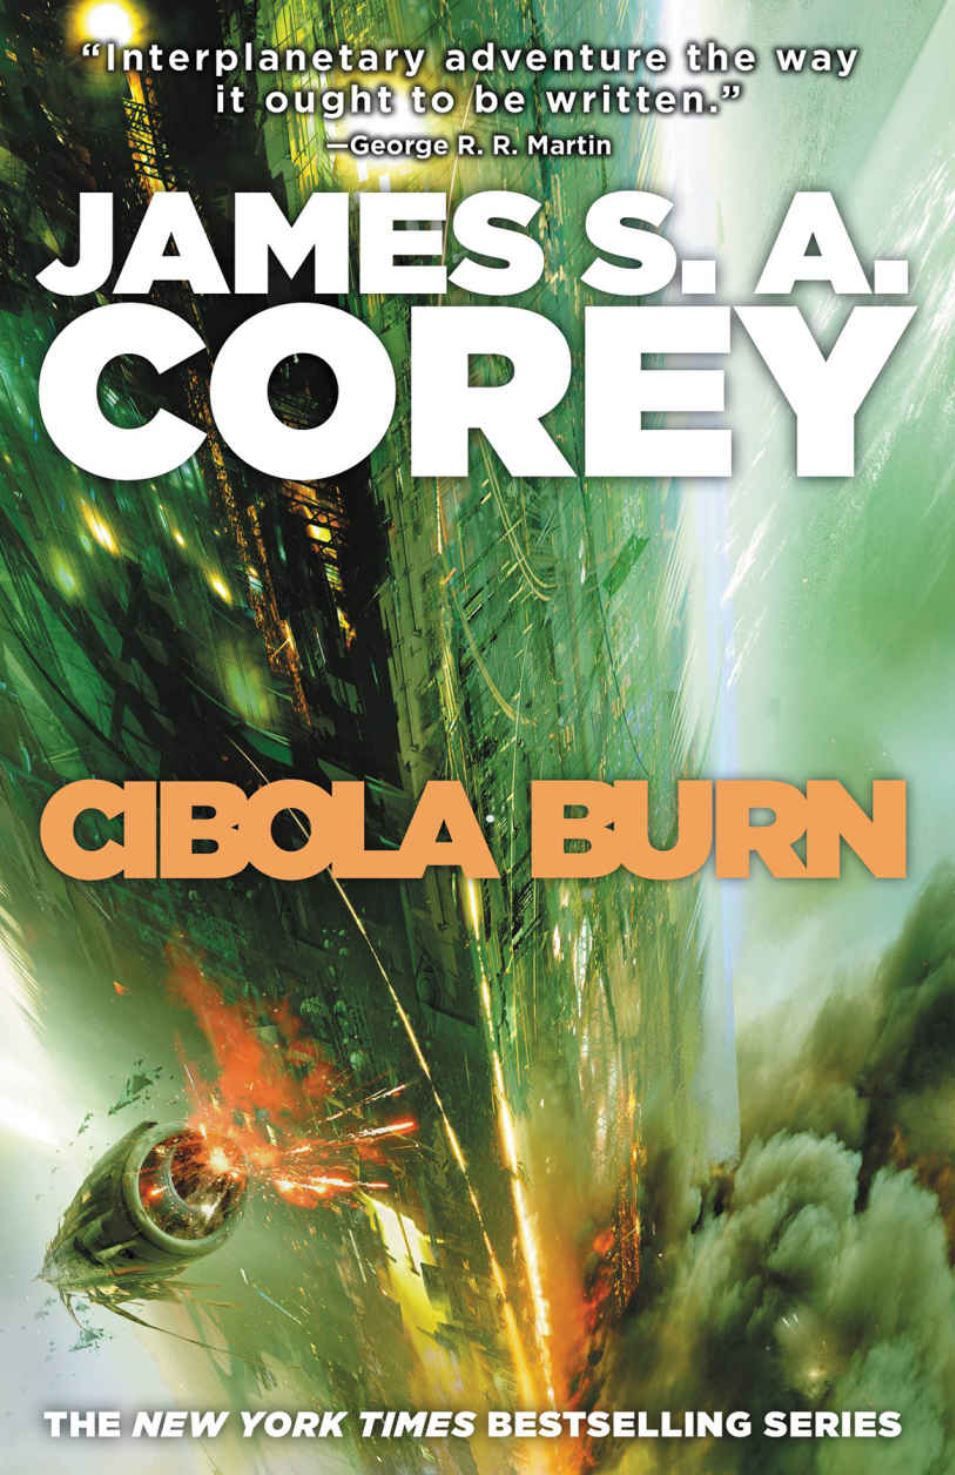 Cover art for Cibola Burn features the Rocinante and weird alien structure on the surface of Ilus. It has a green hue with yellow and orange explosions.